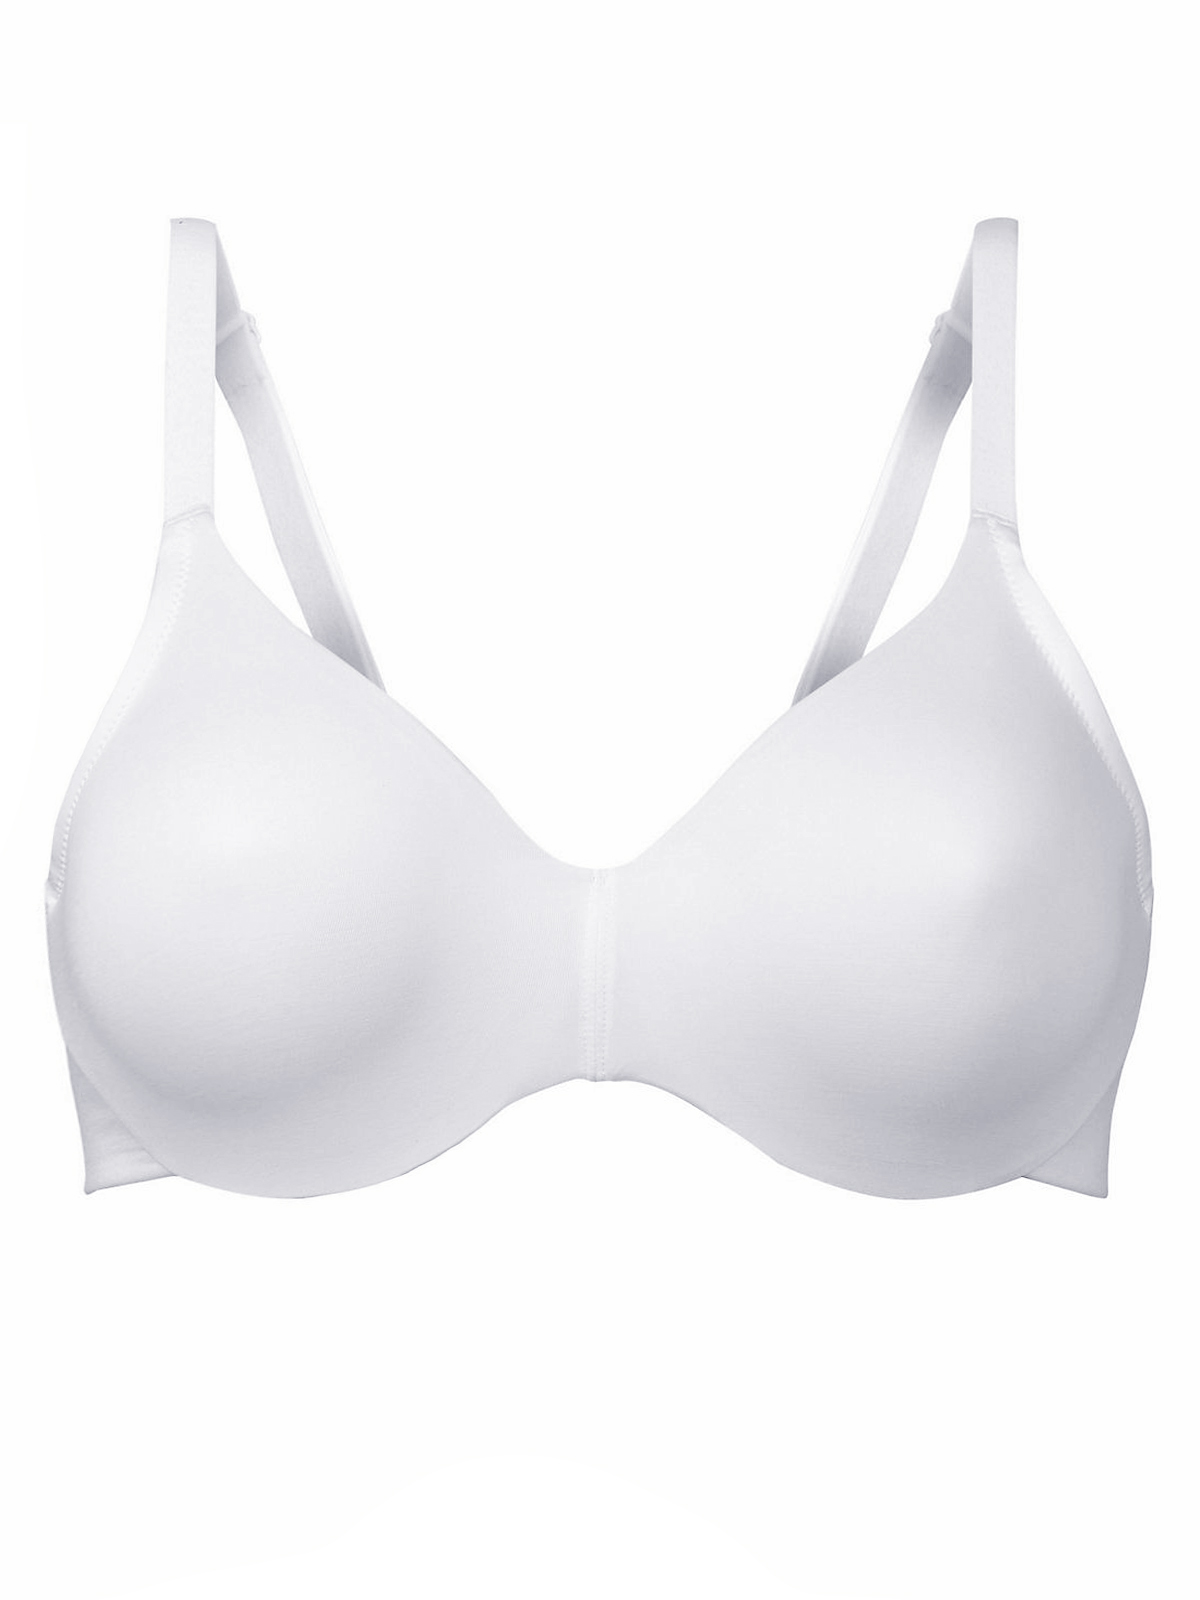 Marks and Spencer - - M&5 WHITE Flexifit Smoothing Underwired Moulded ...